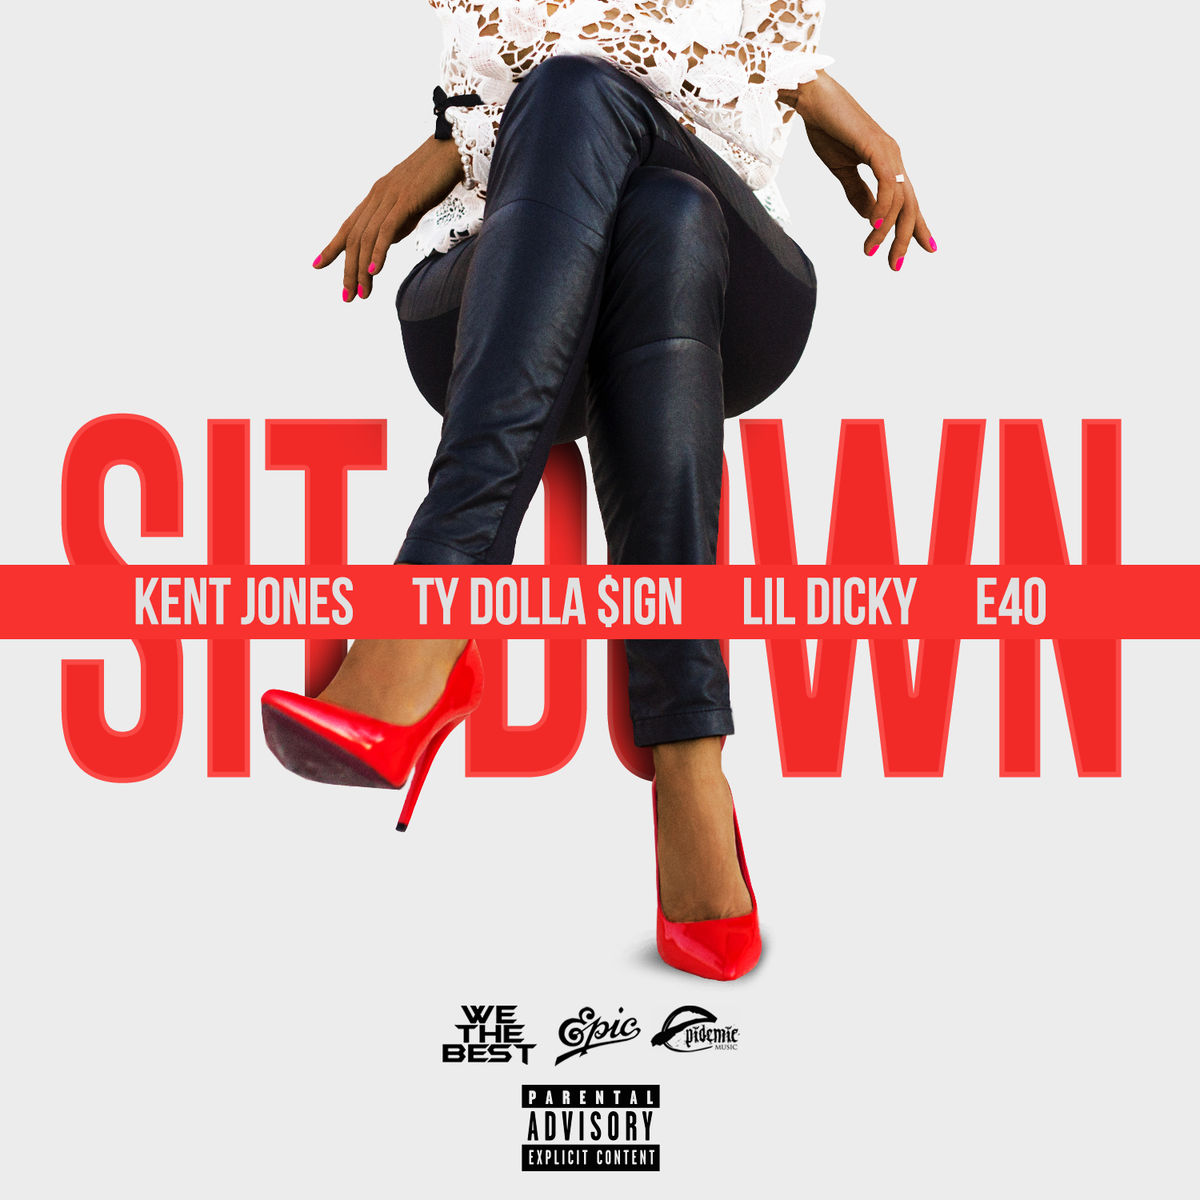 Kent Jones featuring Lil Dicky, E-40, & Ty Dolla $ign — Sit Down cover artwork